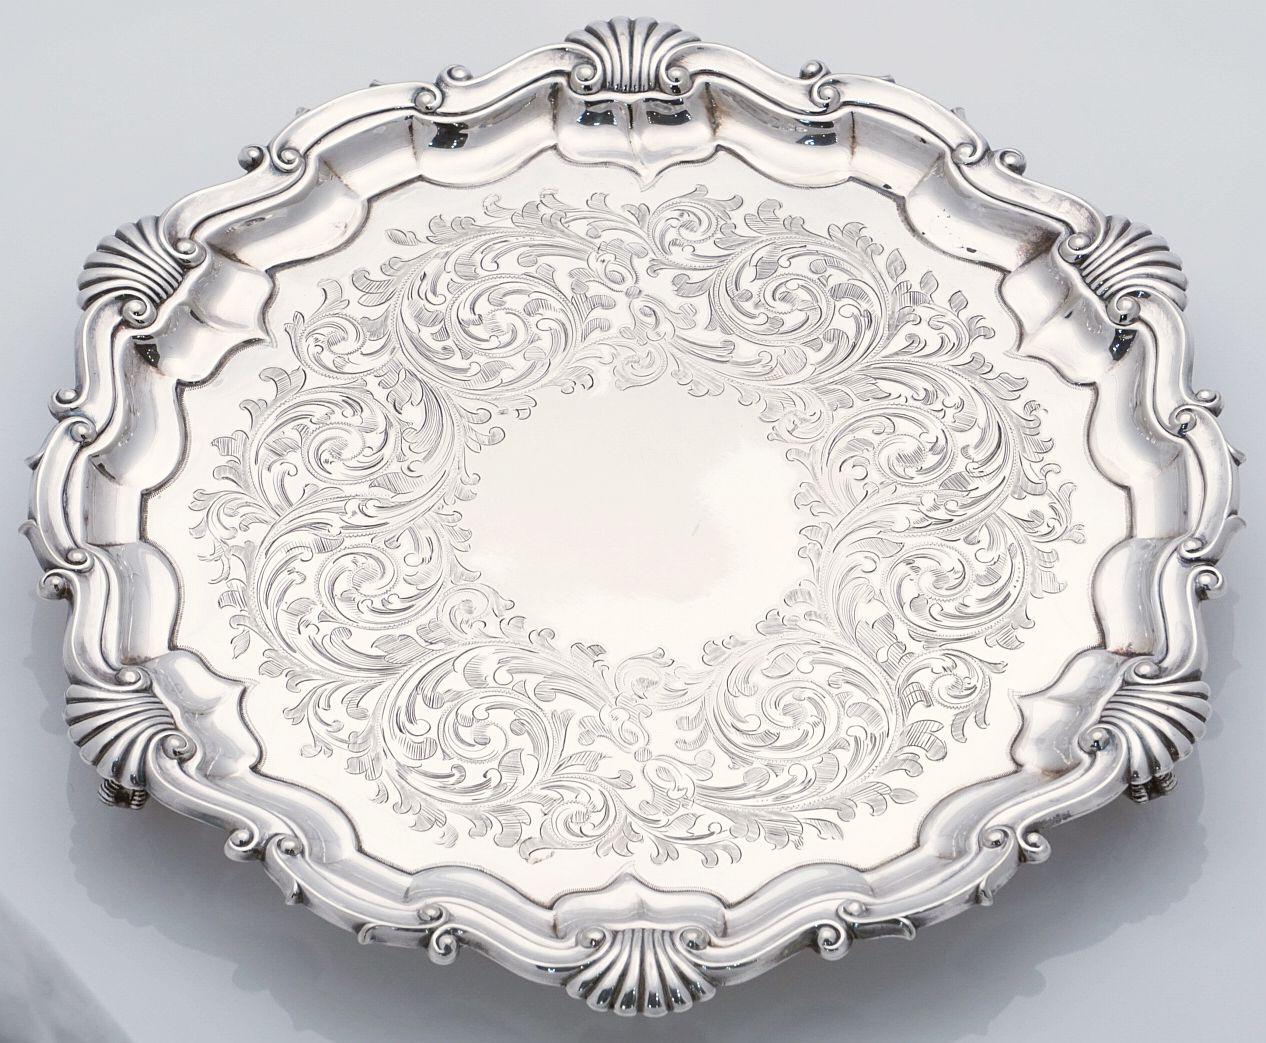 English Silver Footed Tray or Salver with Seashell Motif For Sale 7